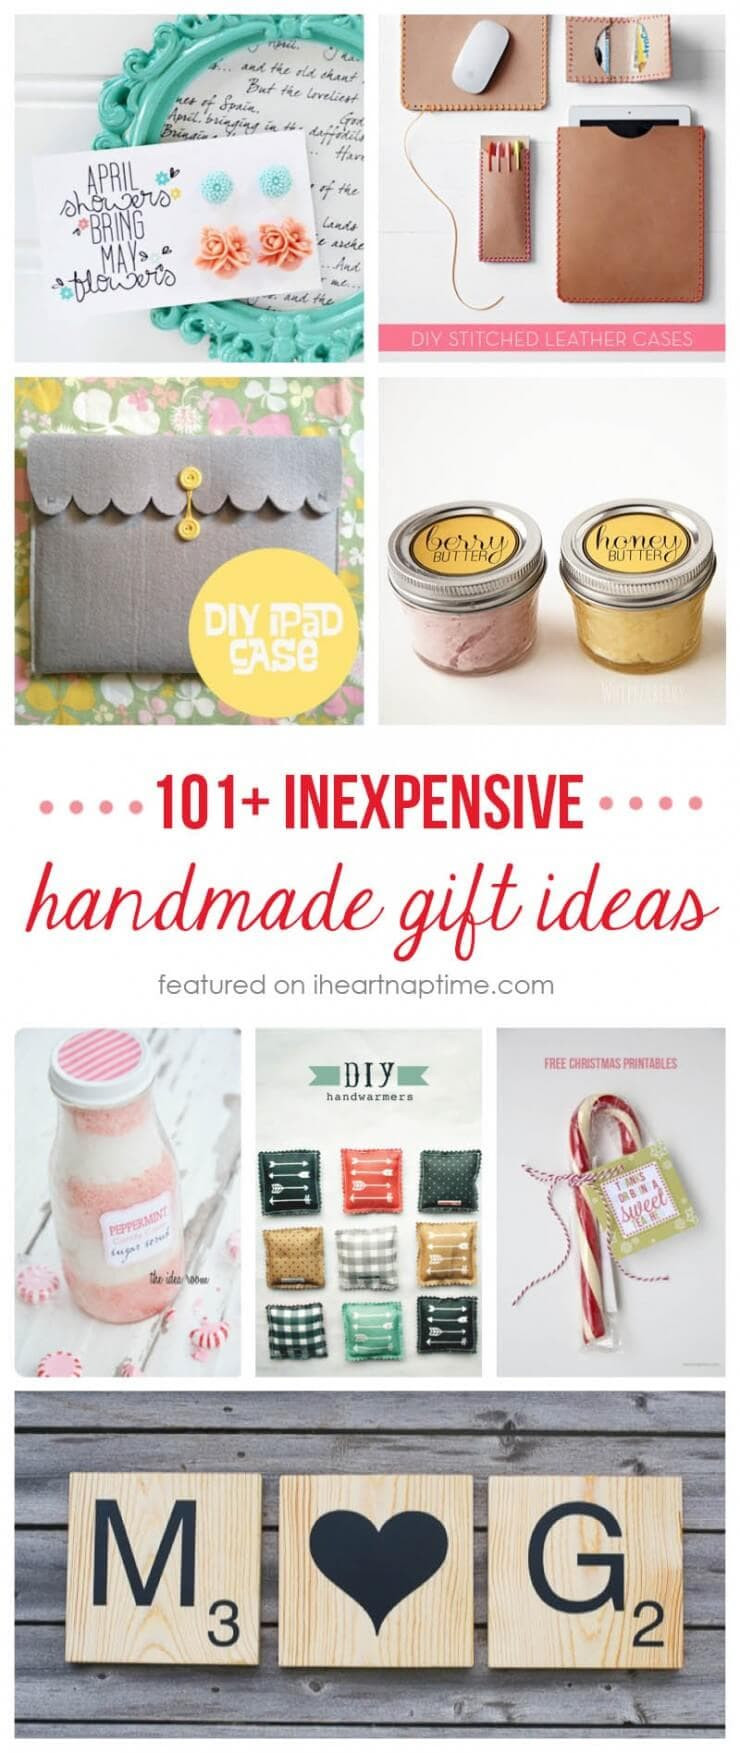 Easy DIY Christmas Gifts
 50 homemade t ideas to make for under $5 I Heart Nap Time